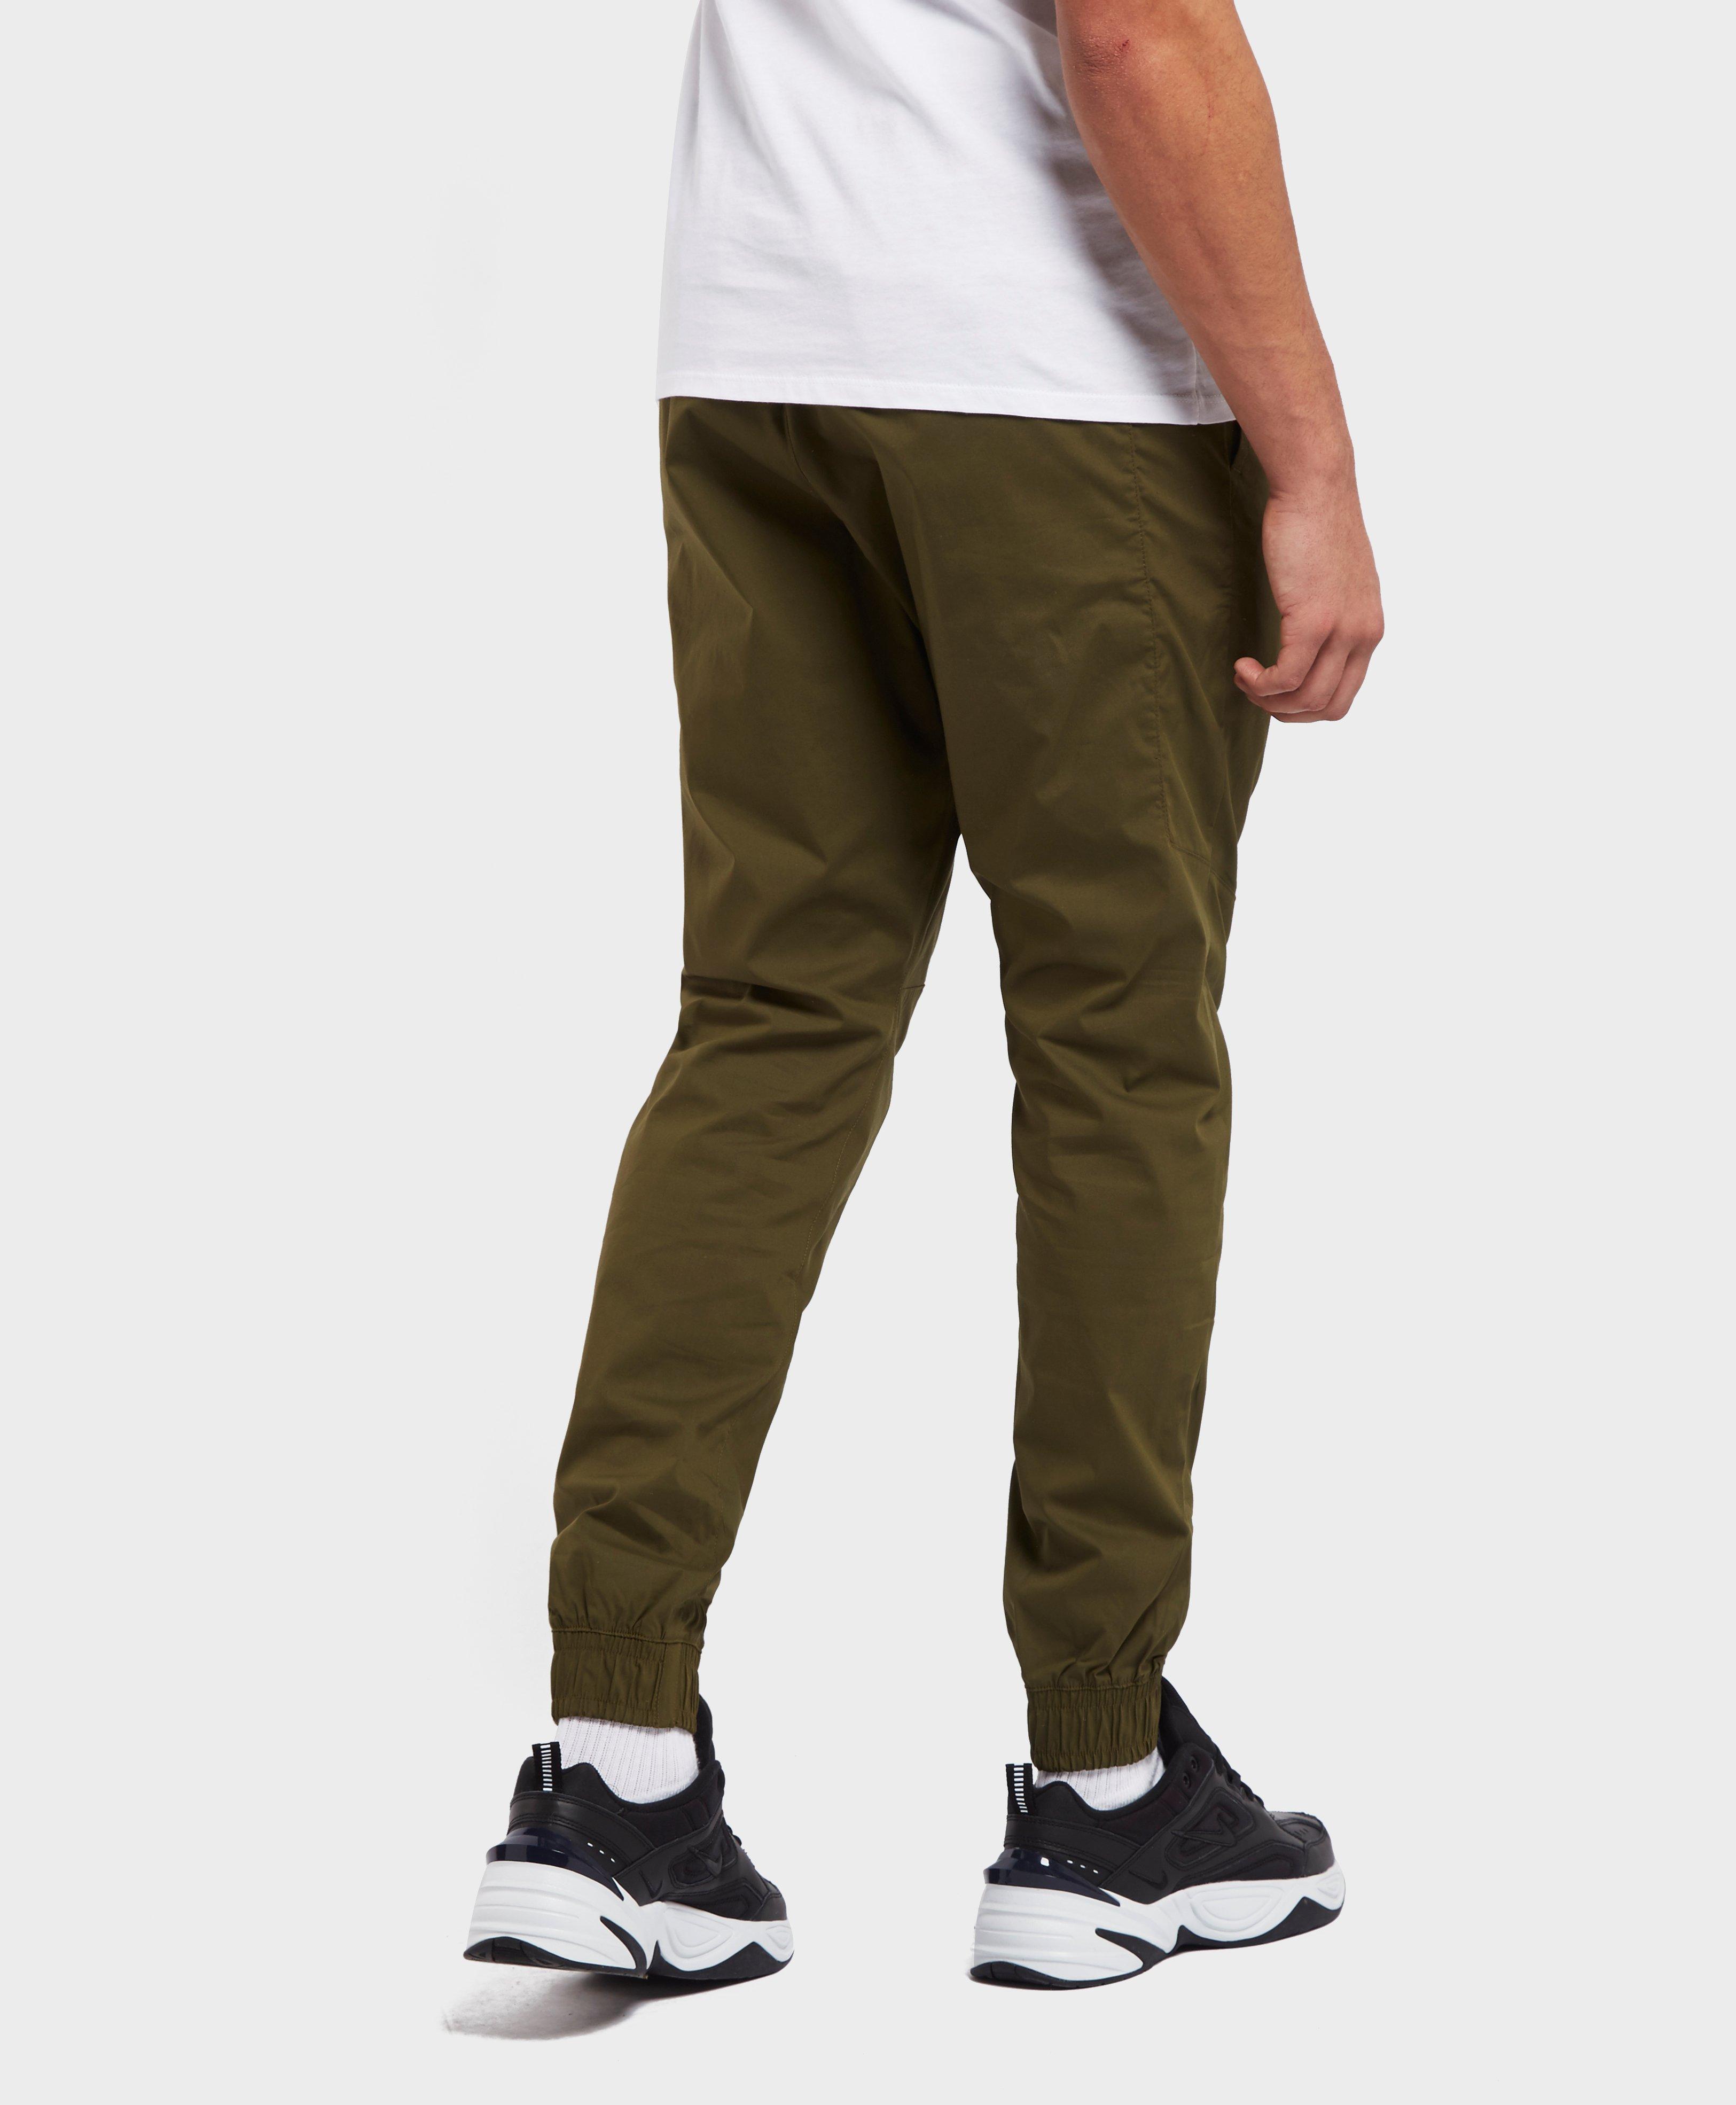 Nike Cotton Twill Cuffed Track Pants in Green for Men - Lyst